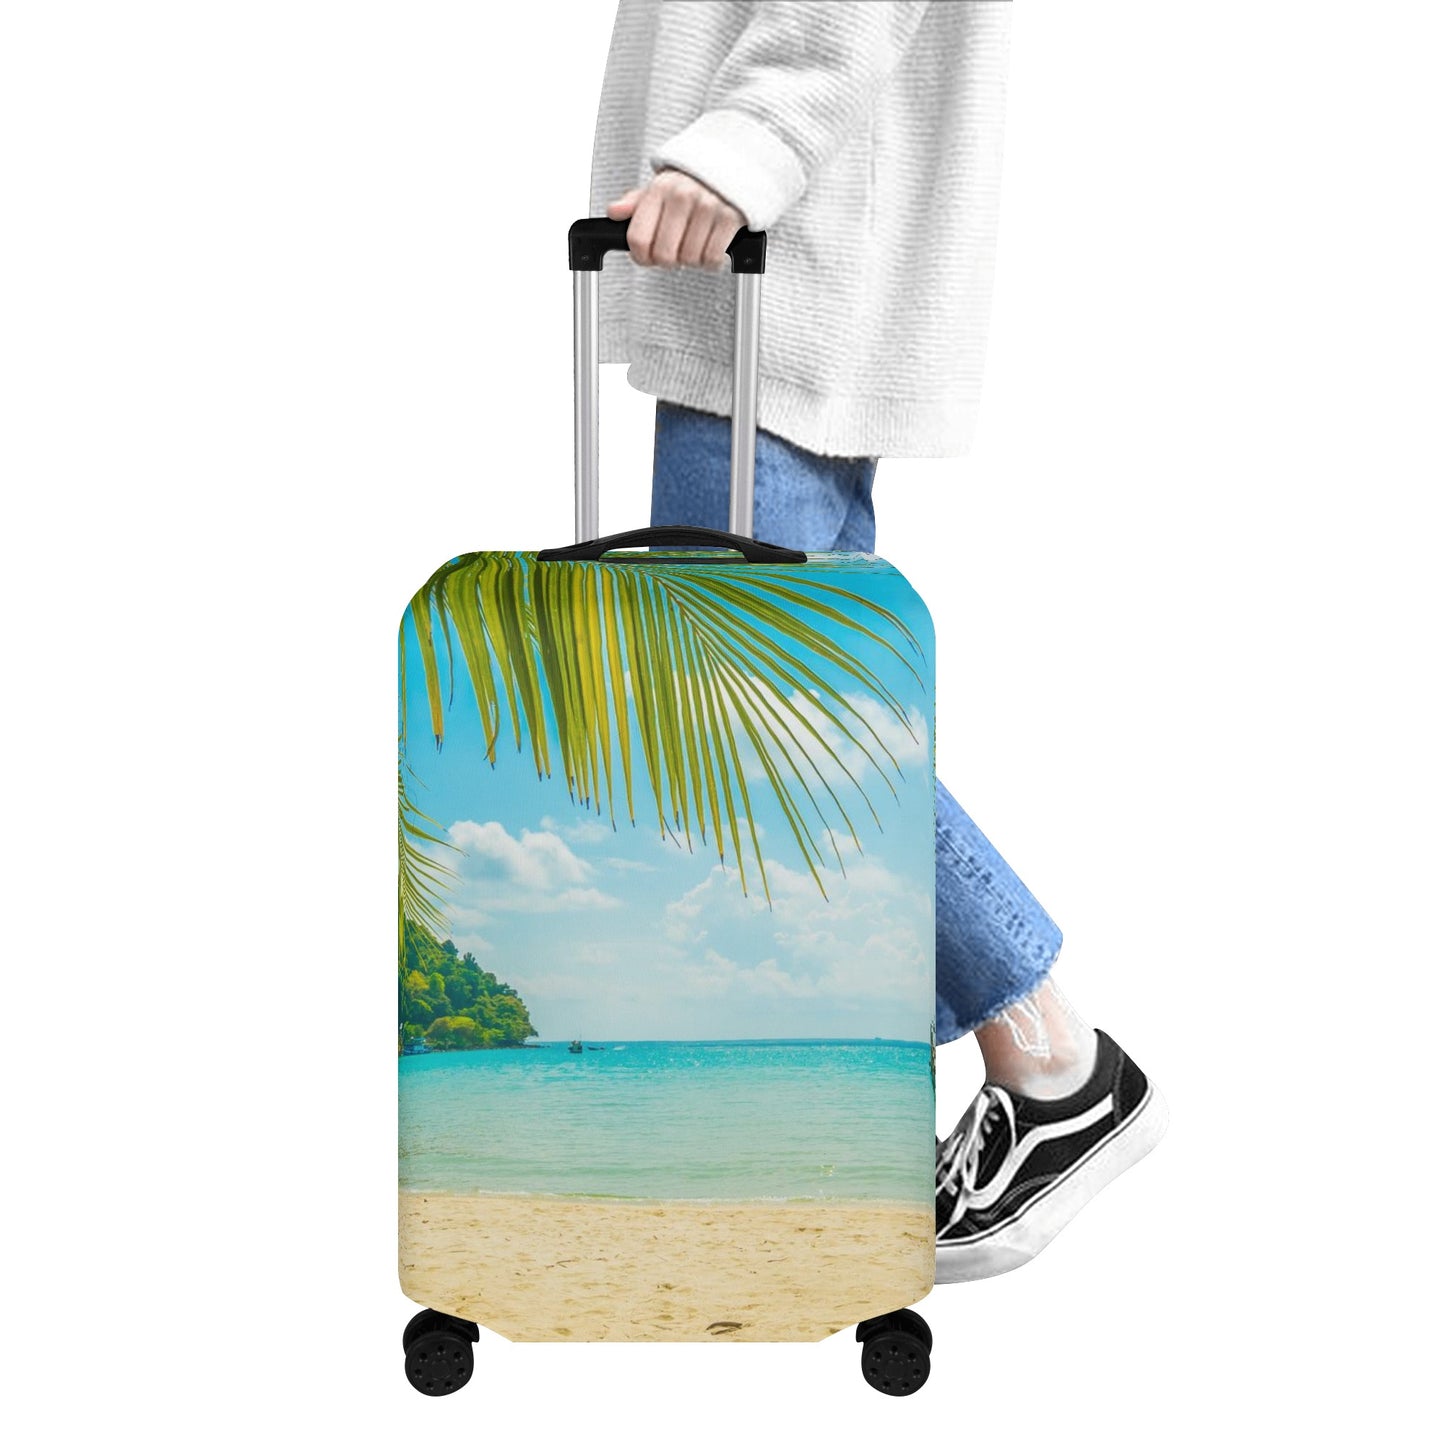 Tropical Beach Luggage Cover, Palm Tree Ocean Vacation Suitcase Protector Hard Carry On Bag Washable Wrap Large Small Travel Sleeve